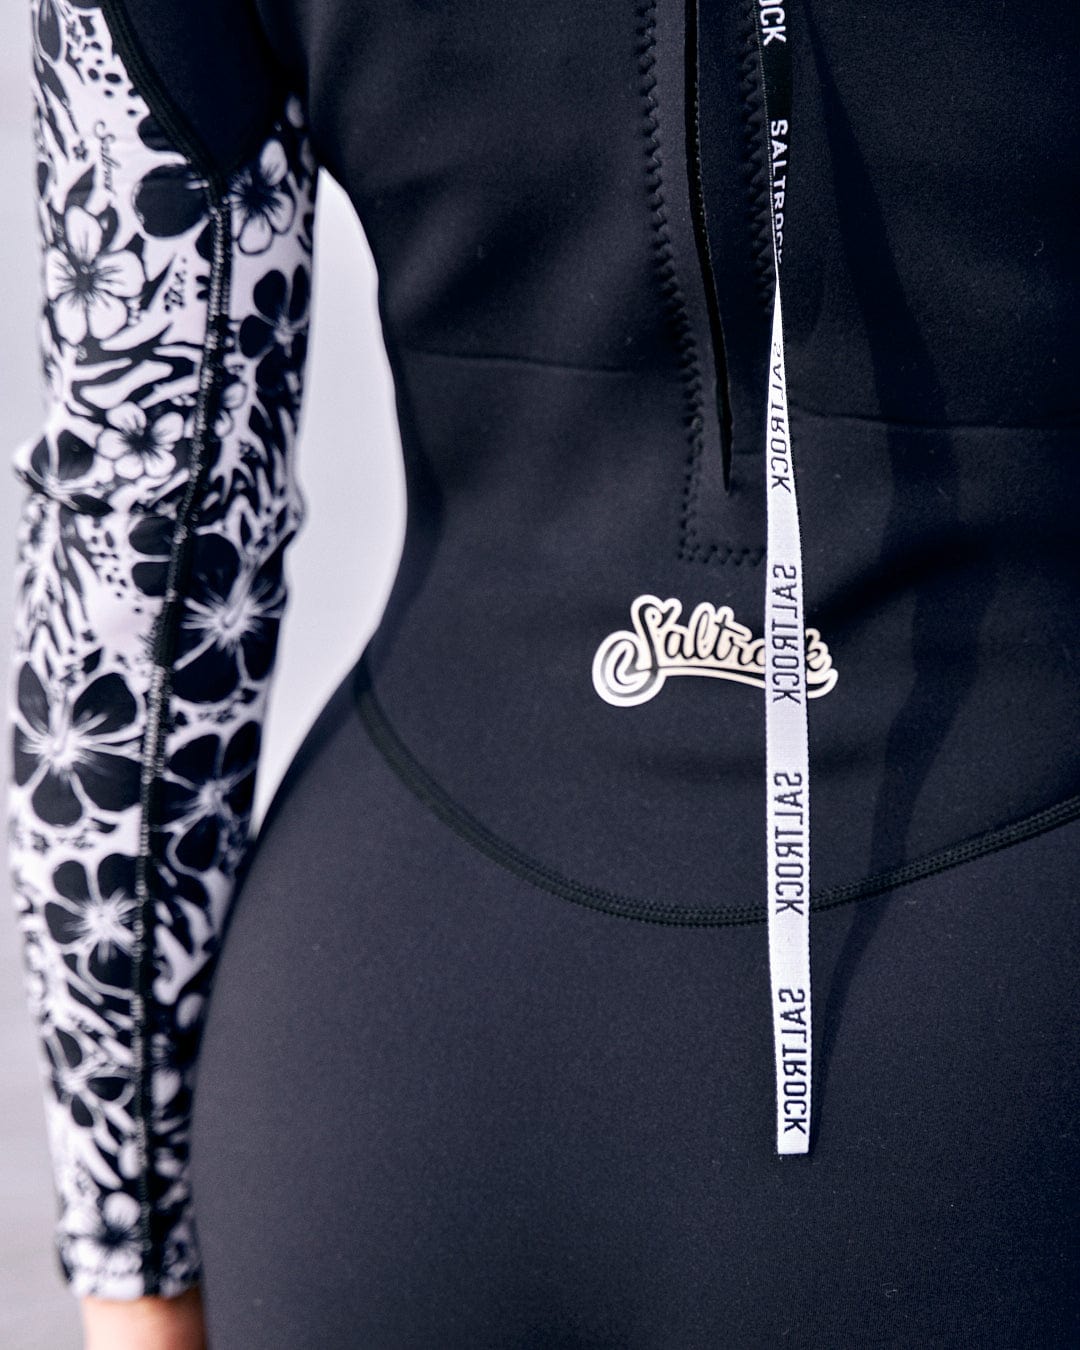 A close-up of a person wearing a black and white floral patterned sleeve and a neoprene wetsuit with a Saltrock logo and zipper pull detail, Hibiscus - Womens Shortie Wetsuit - Black.